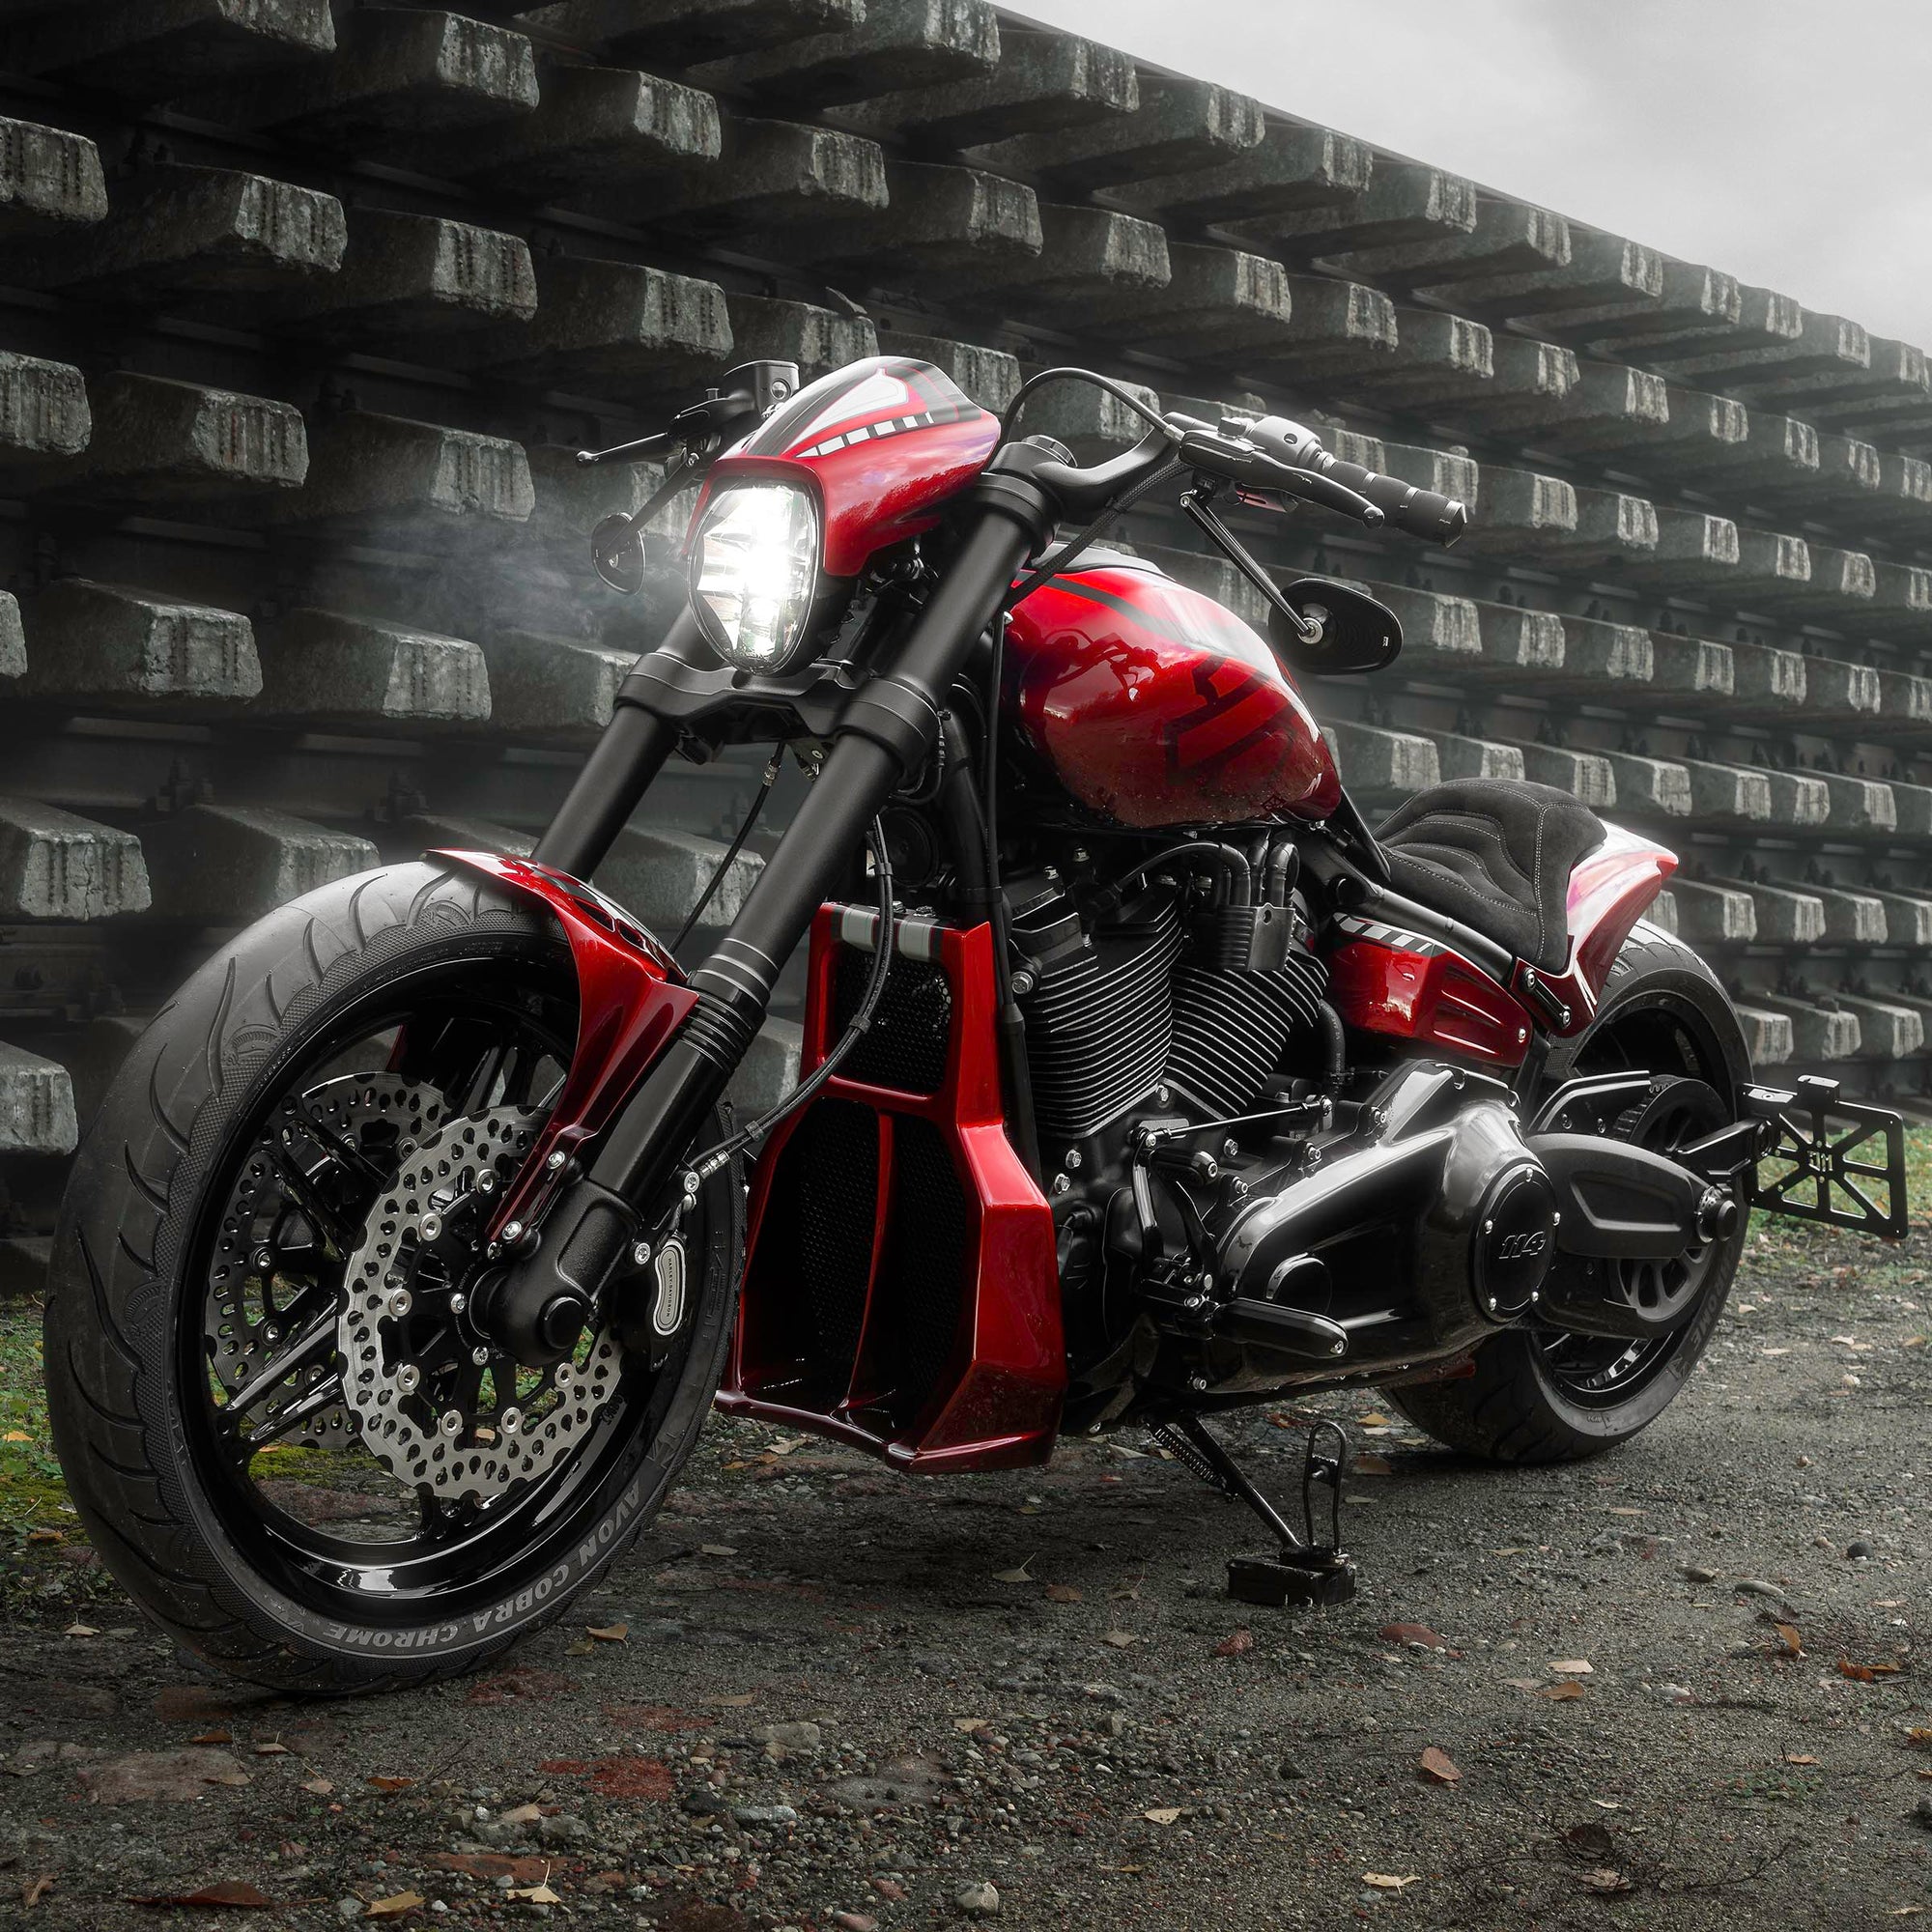 Modified Harley Davidson Softail motorcycle with Killer Custom parts from the side outside on a gloomy day in an industrial environment